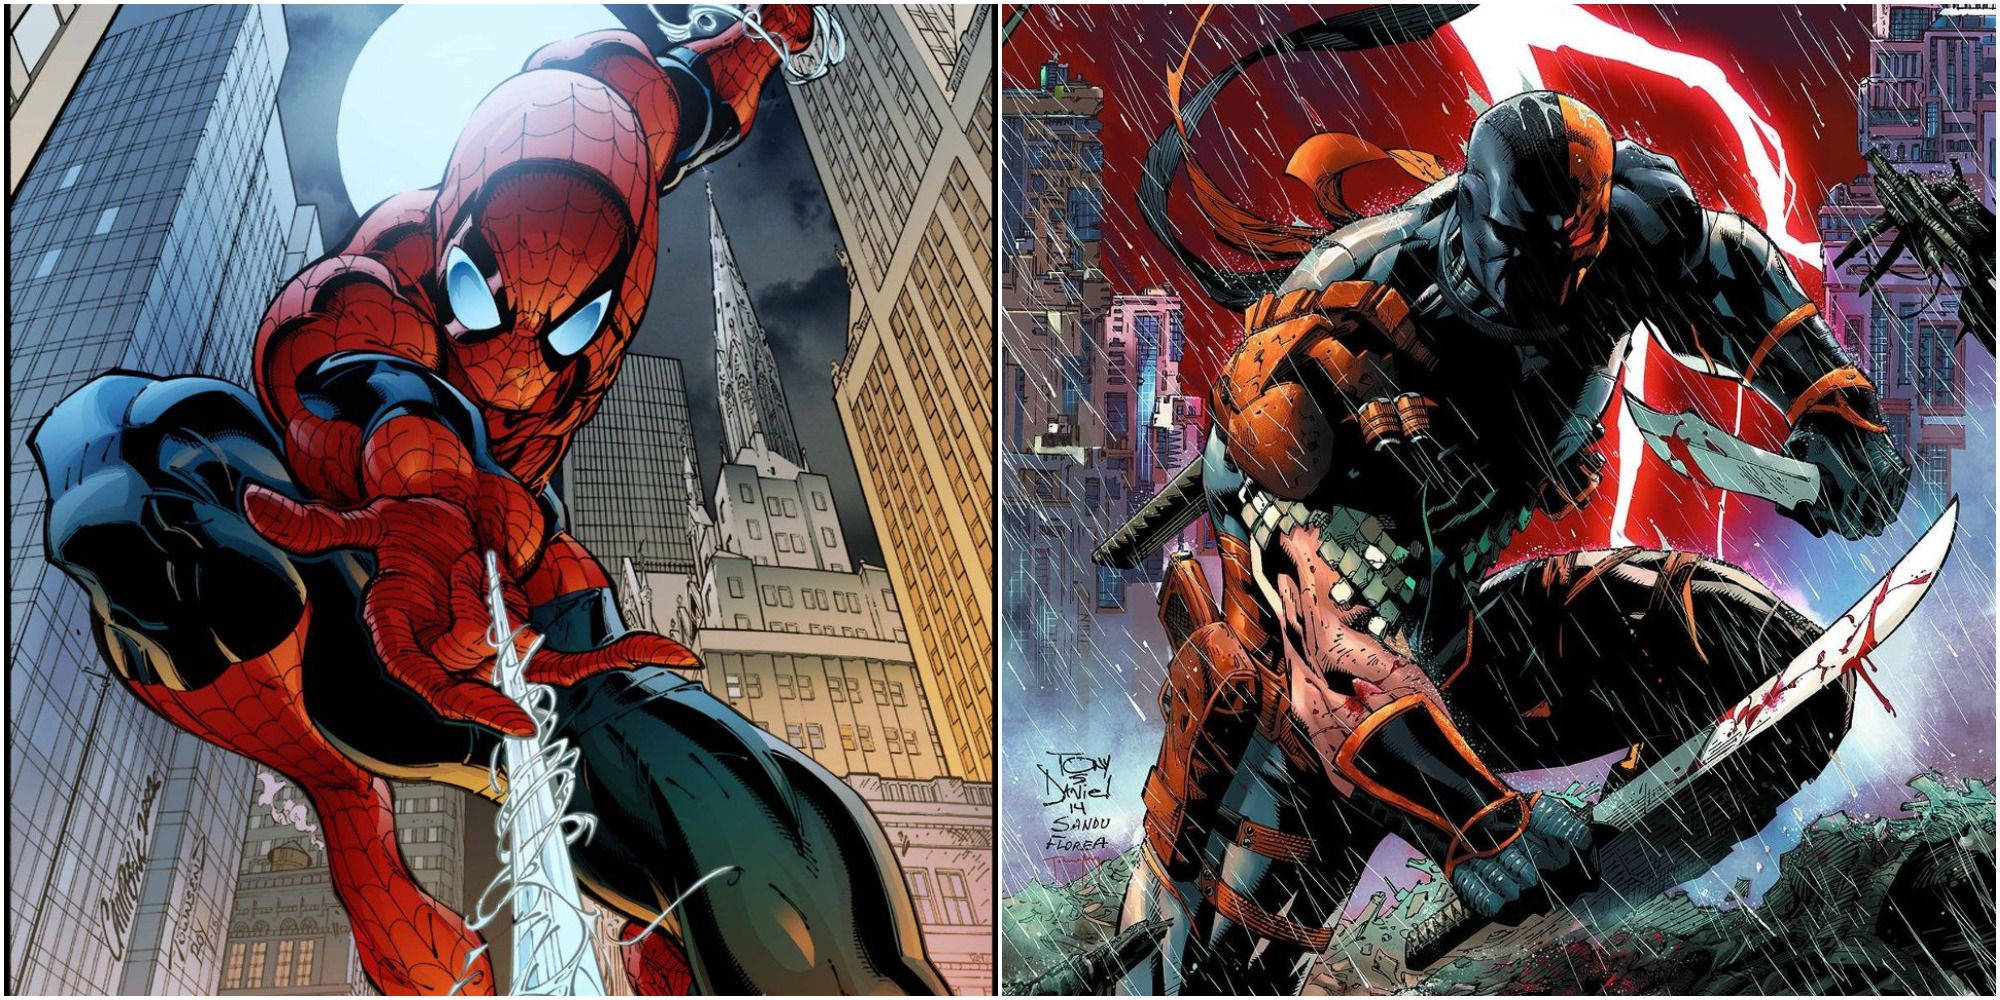 Spider-Man and Deathstroke